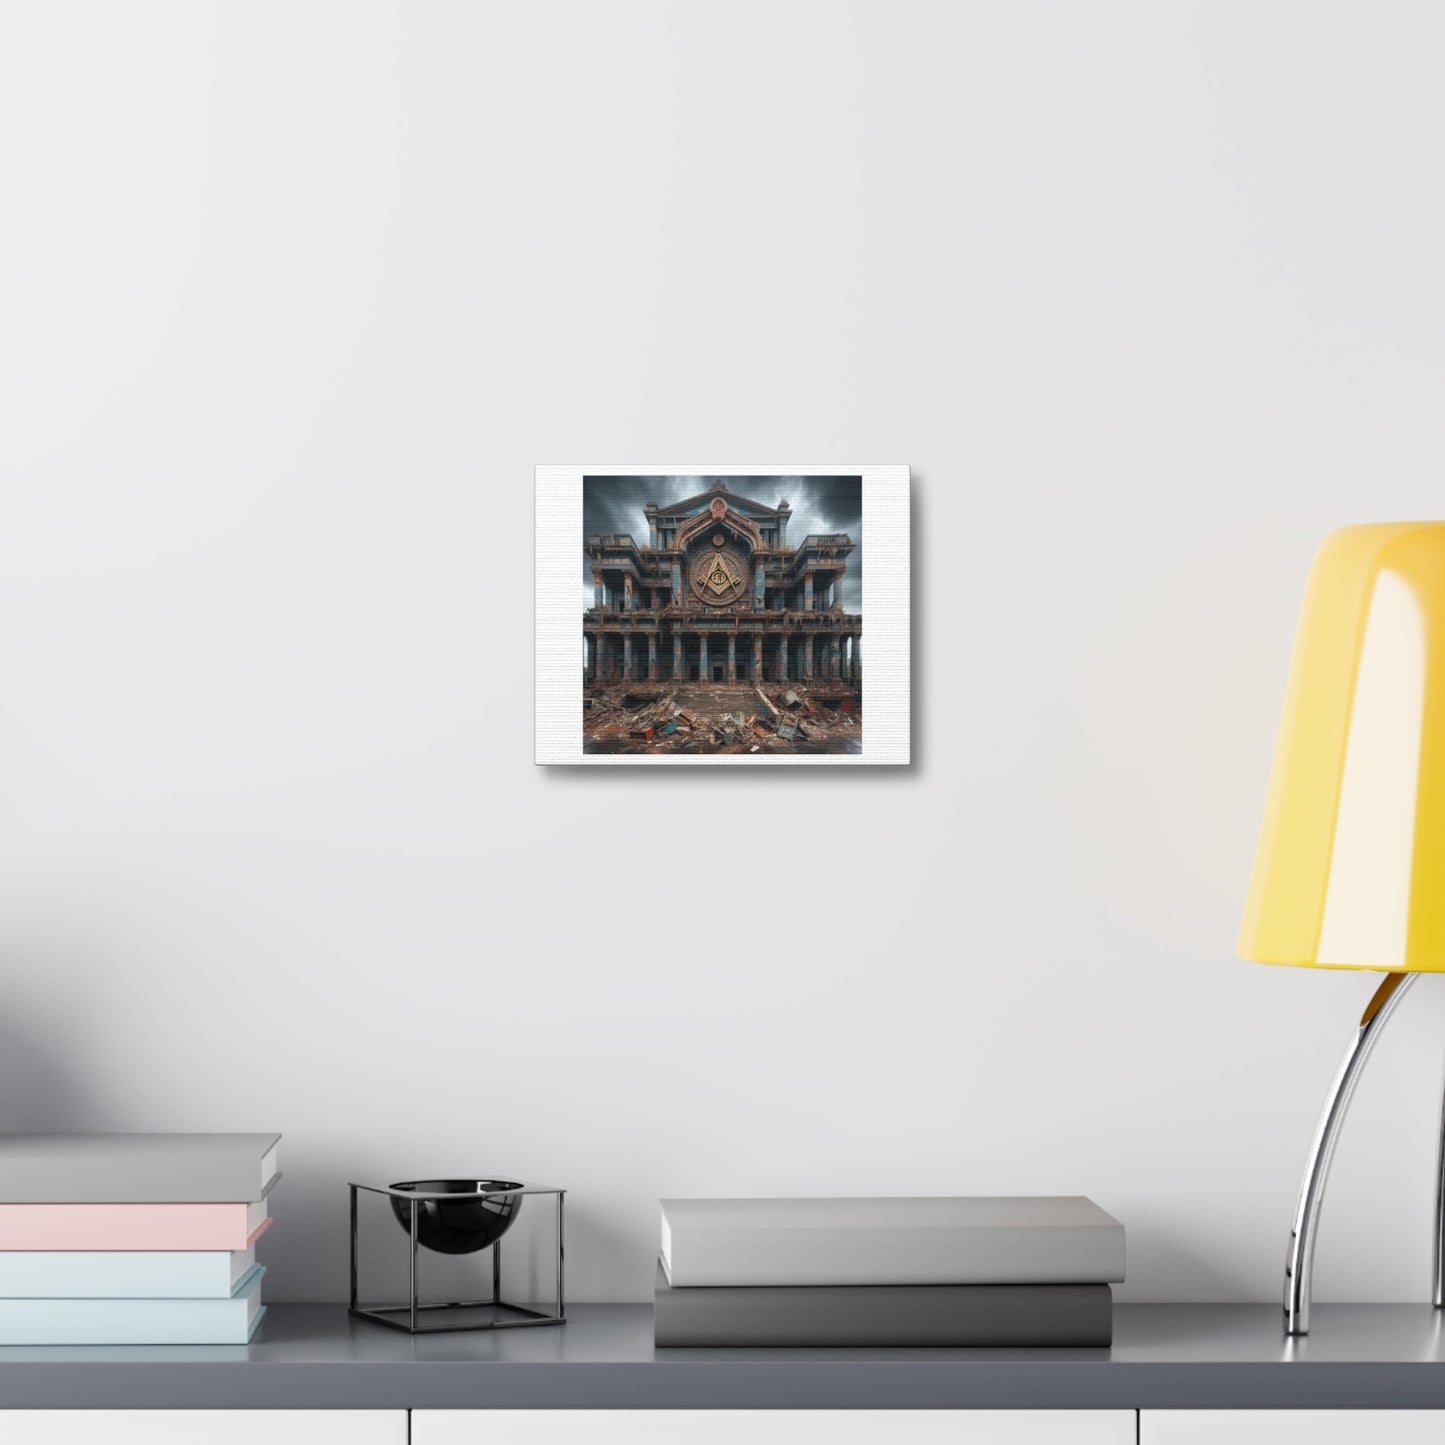 Huge Masonic Hall is Dilapidated and Falling Down, Art Print 'Designed by AI' on Canvas